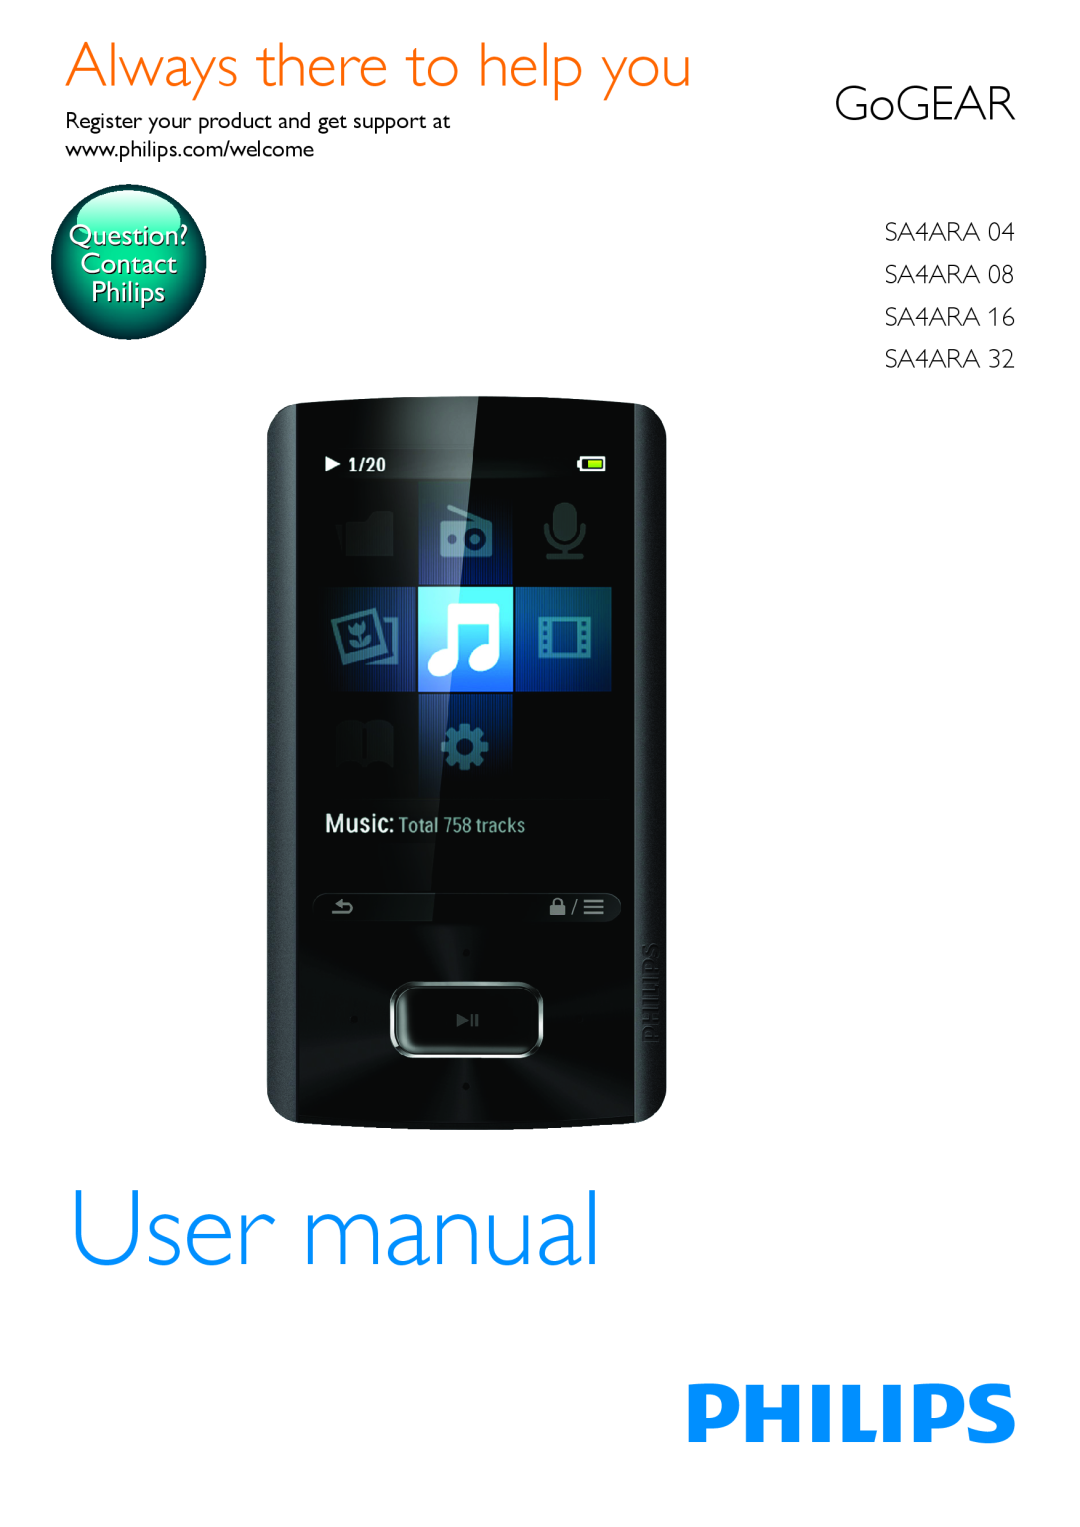 Philips SA4ARA 08, SA4ARA 04 user manual Question? Contact Philips, User manual, Always there to help you, GoGEAR 